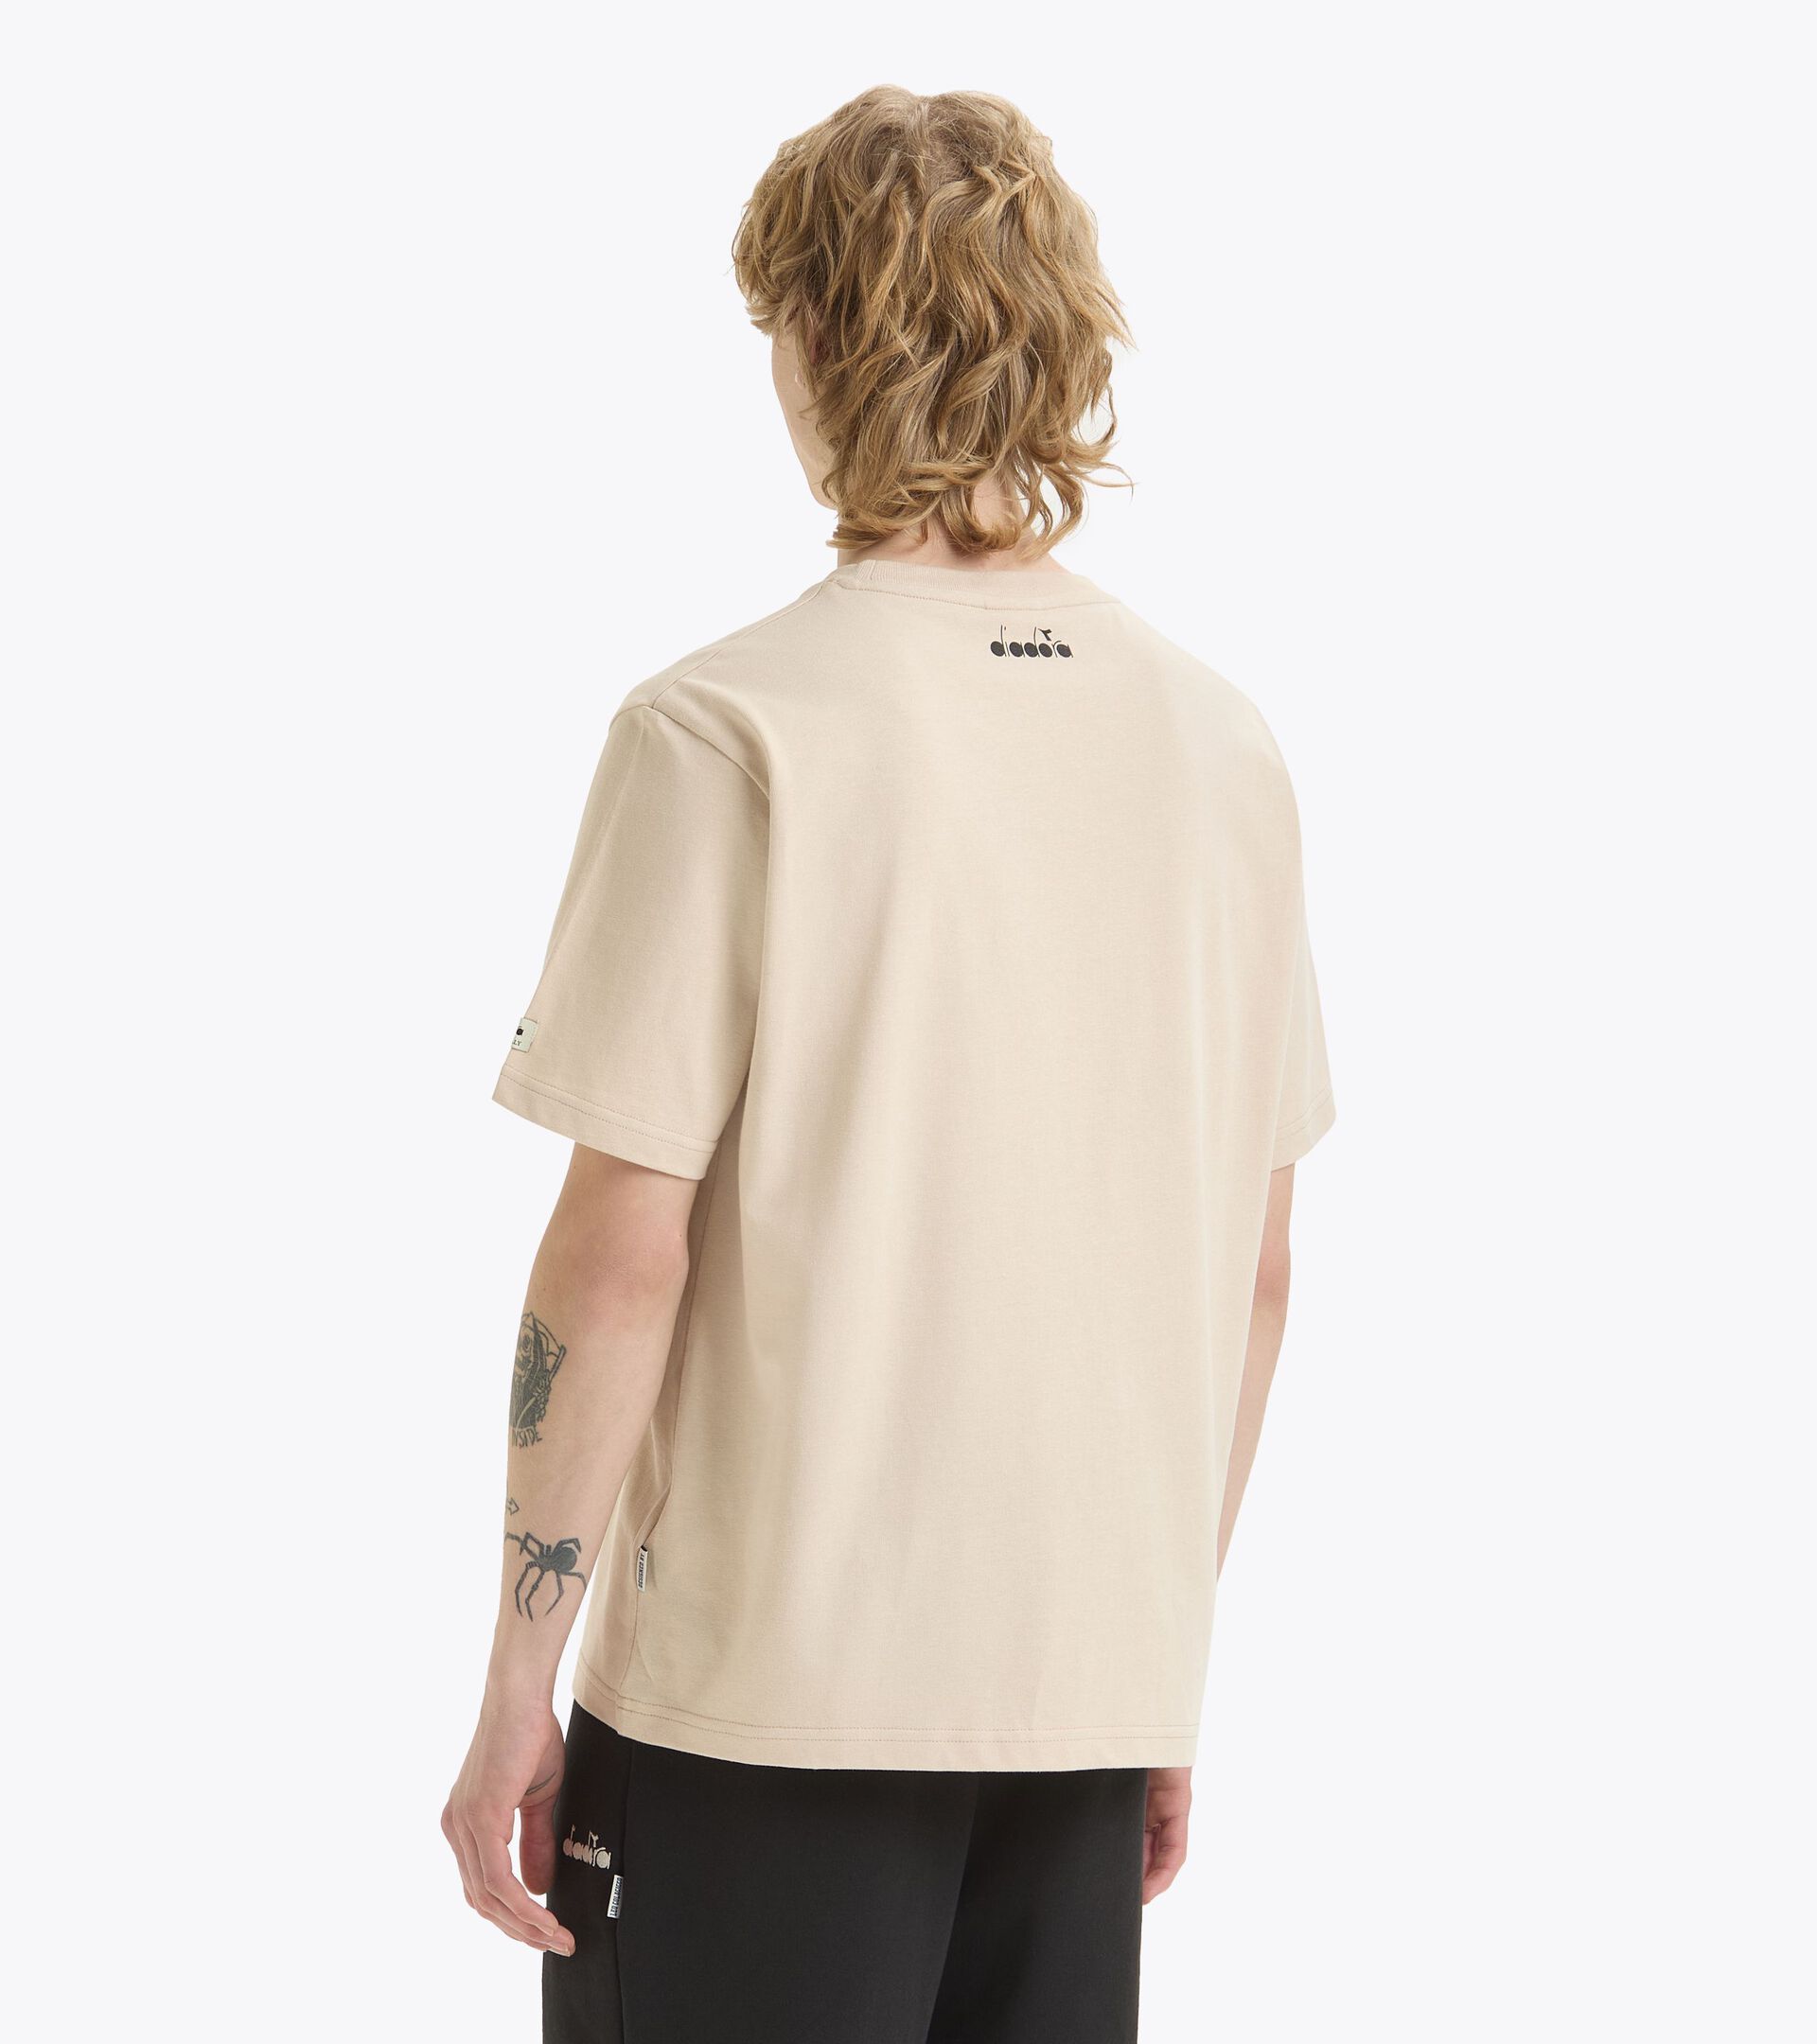 50% recycled cotton t-shirt - Made in Italy - Gender Neutral  T-SHIRT SS LEGACY RAINY DAY - Diadora